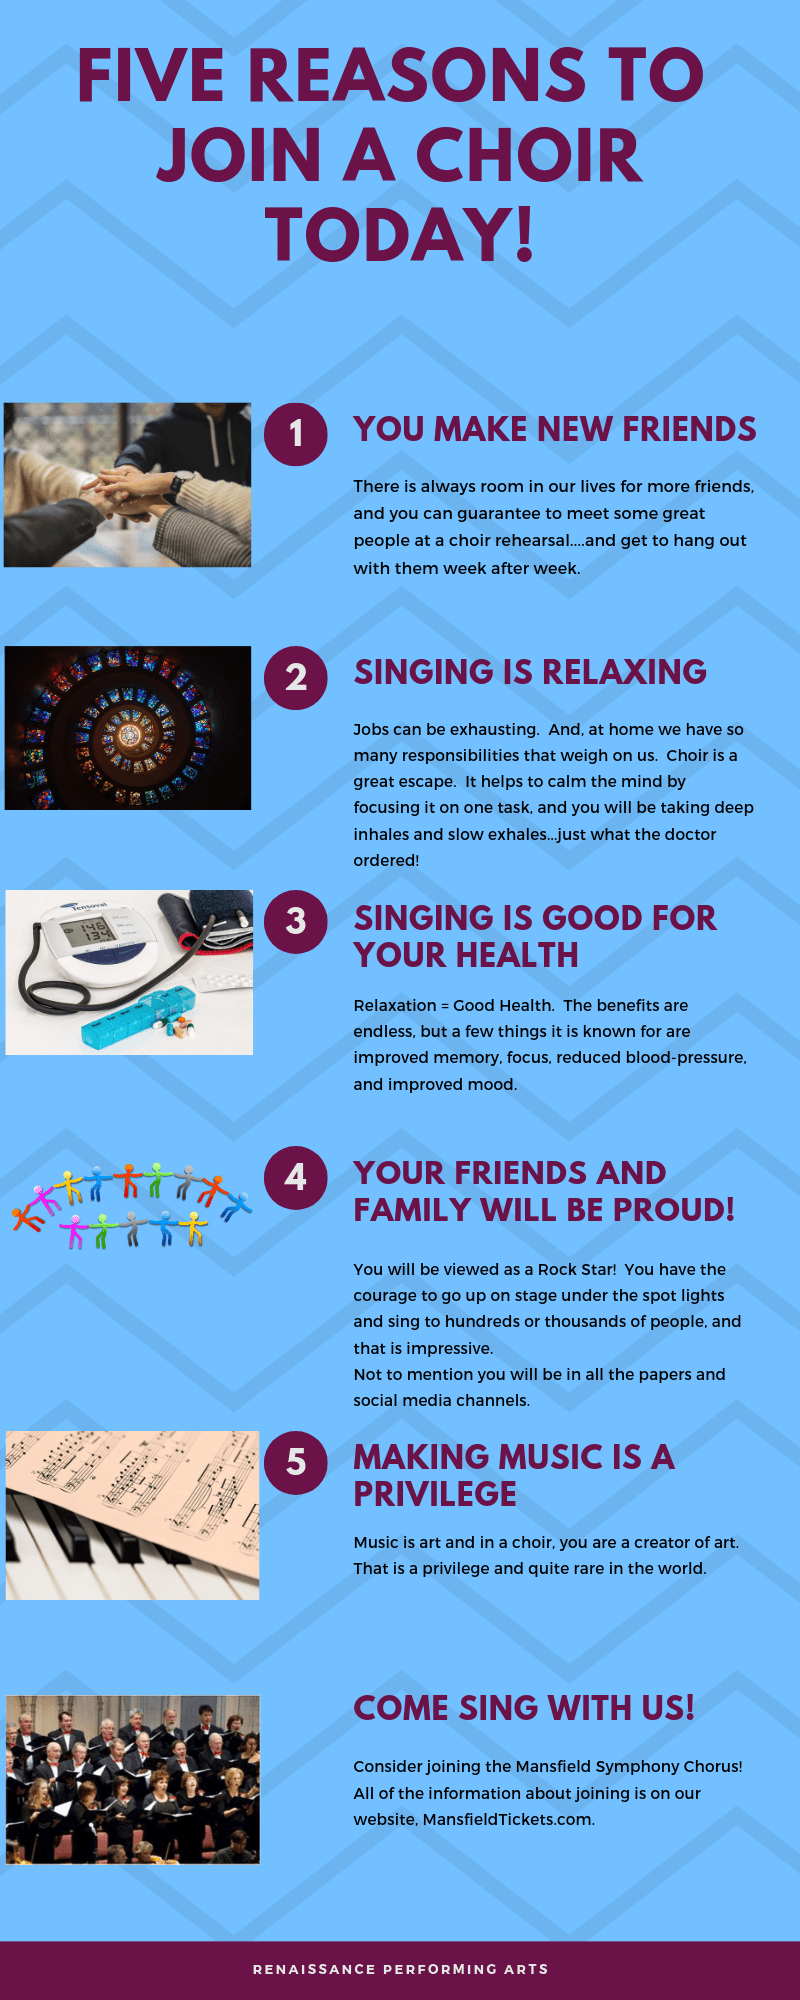 FIVE REASONS TO JOIN A CHOIR TODAY!